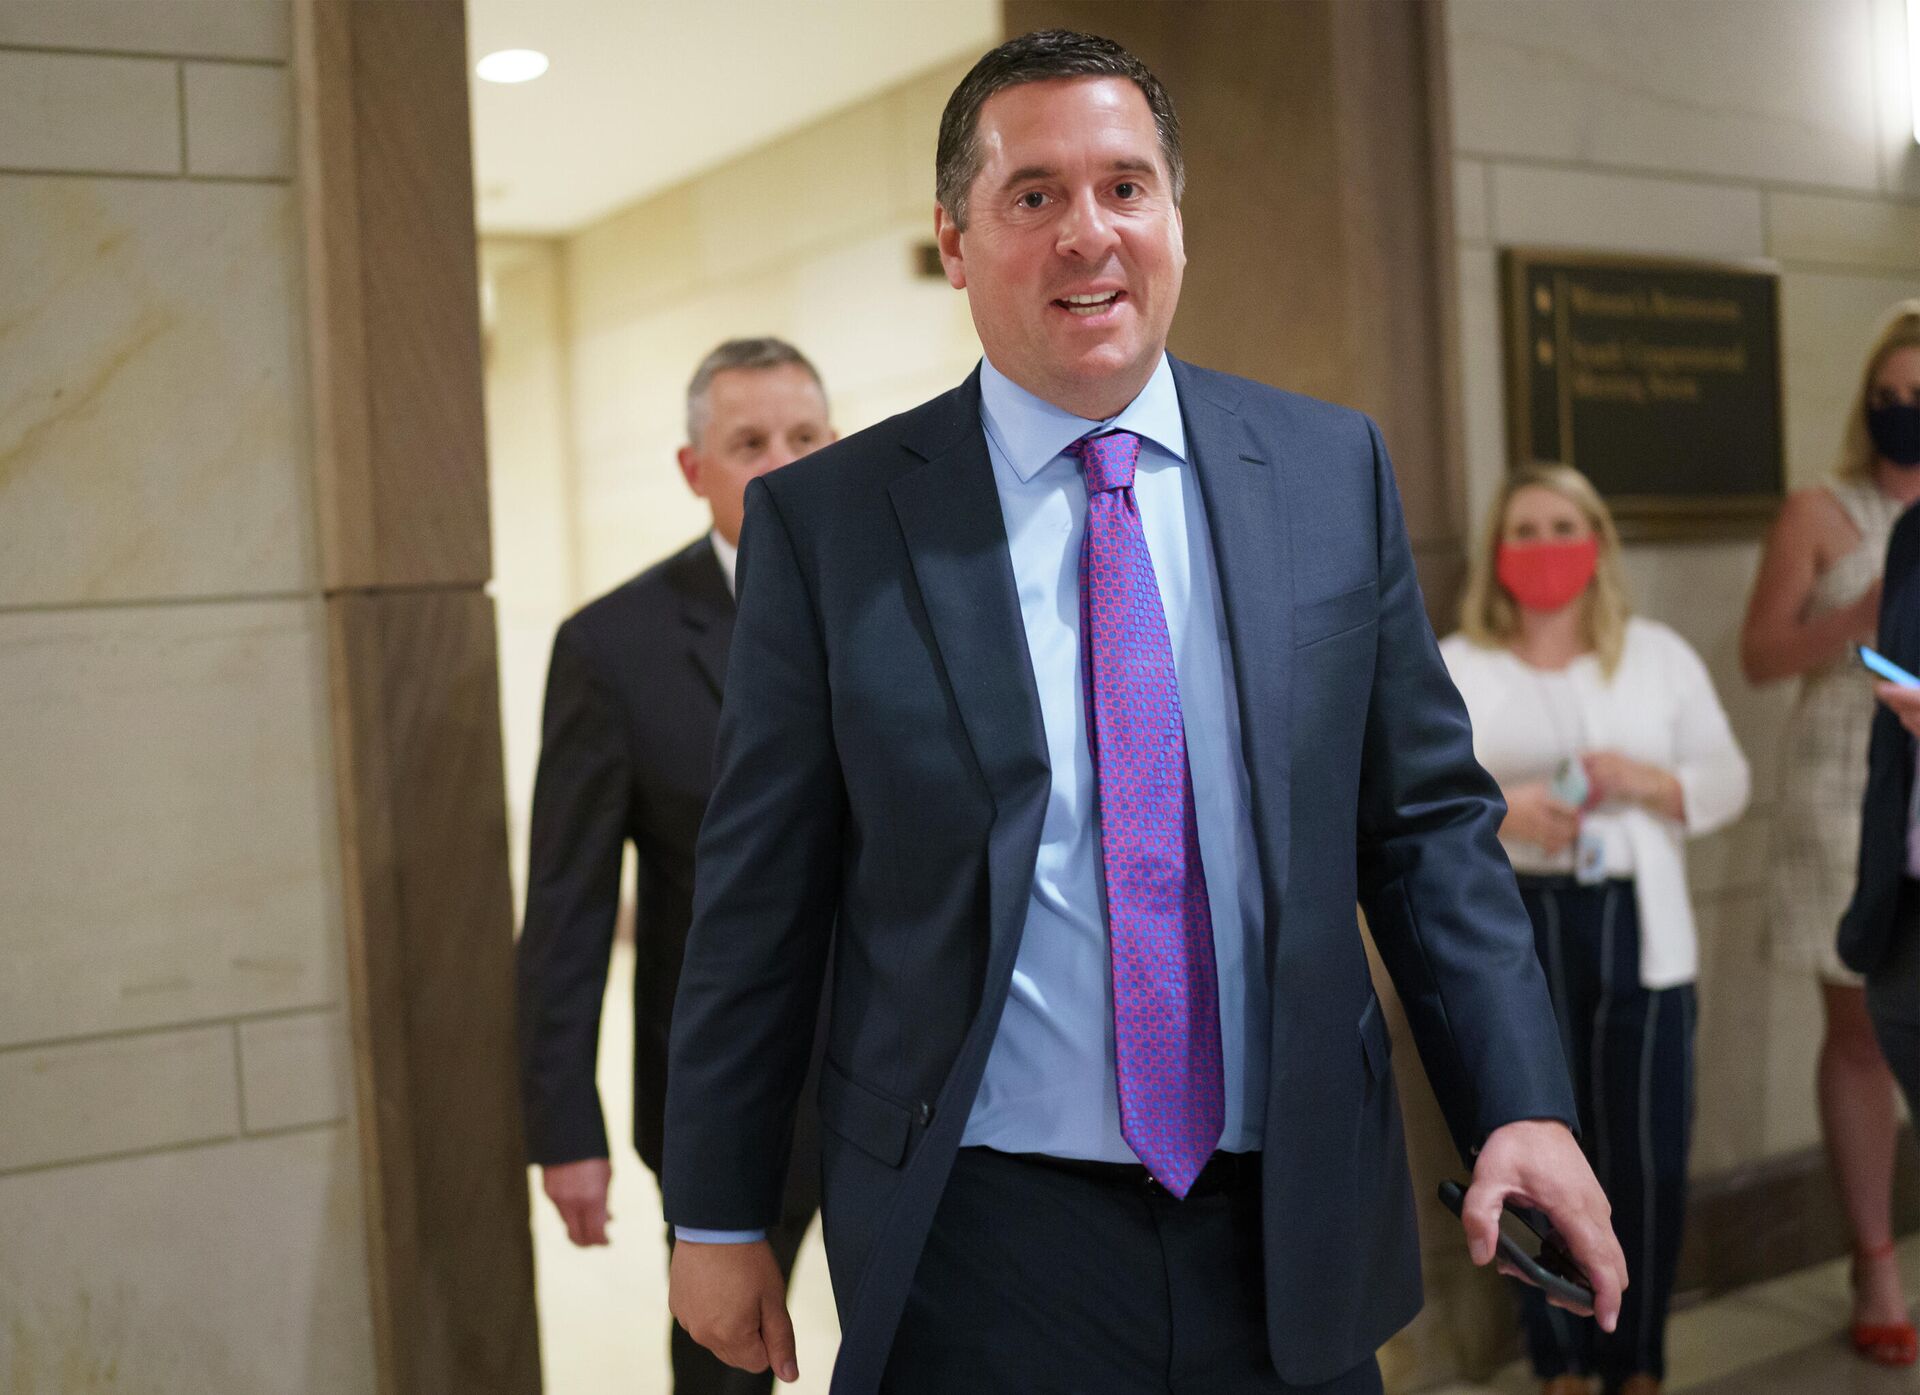 Rep. Devin Nunes, R-Calif, and fellow Republicans arrive for a meeting to consider a replacement for Rep. Liz Cheney, R-Wyo., was ousted from the GOP leadership Wednesday at the Capitol in Washington, Thursday, May 13, 2021. - Sputnik International, 1920, 06.03.2022